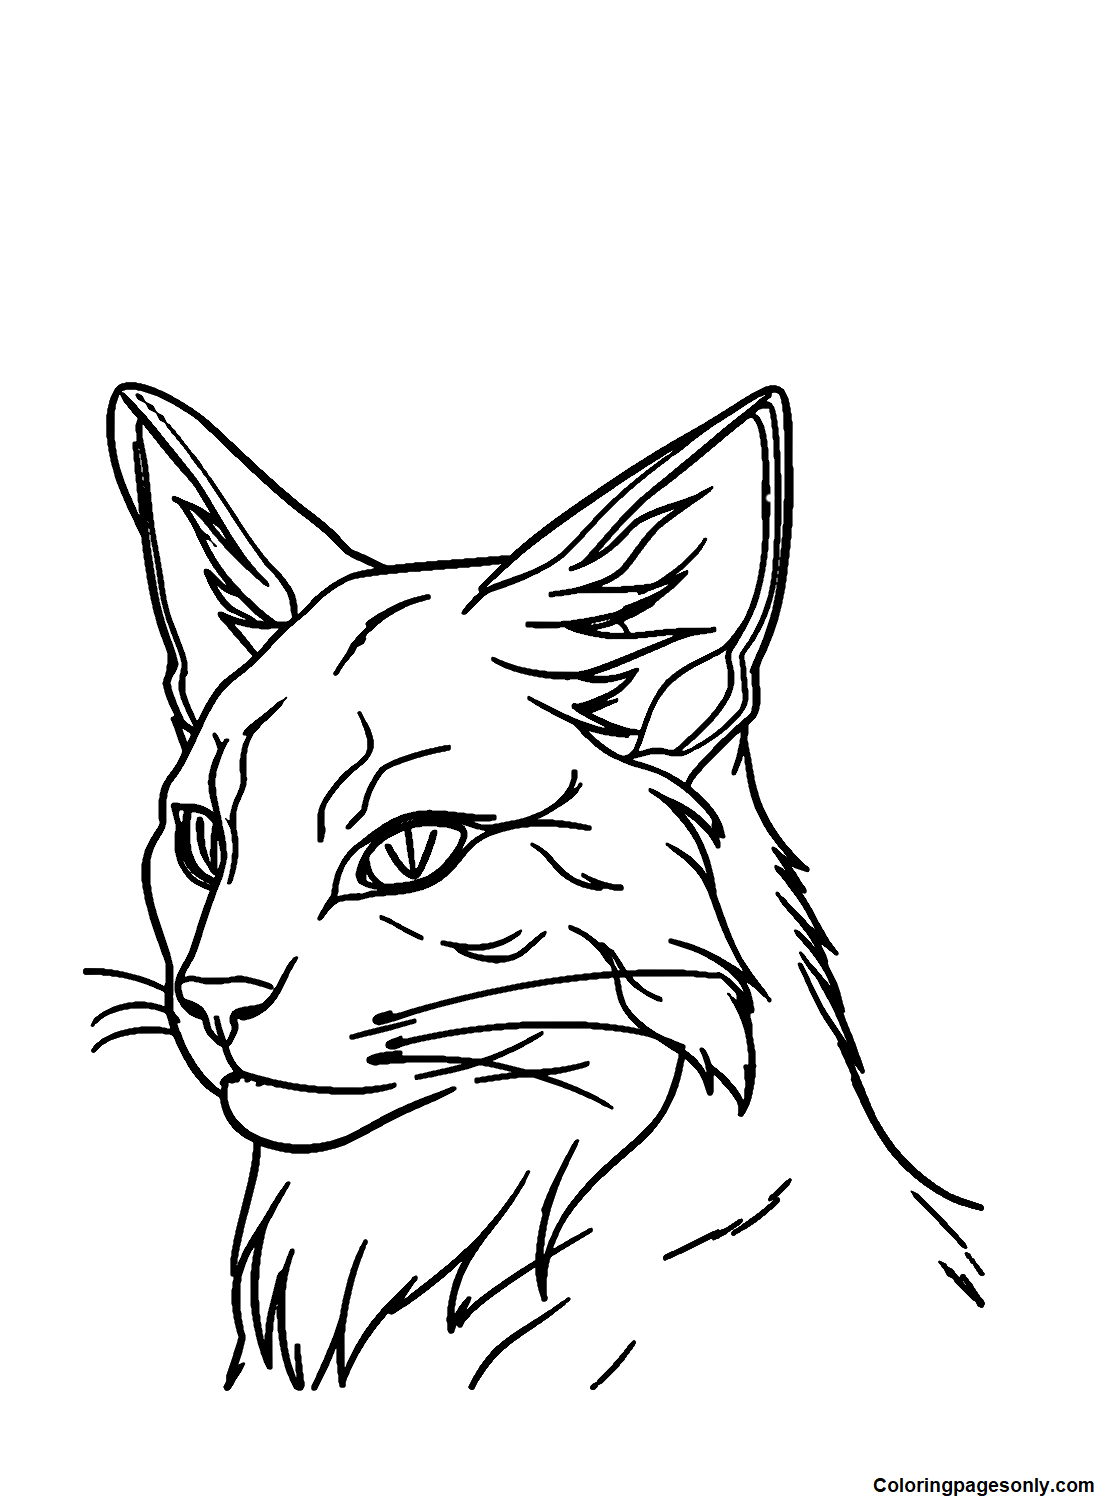 Firestar Warrior Cats Coloring Page